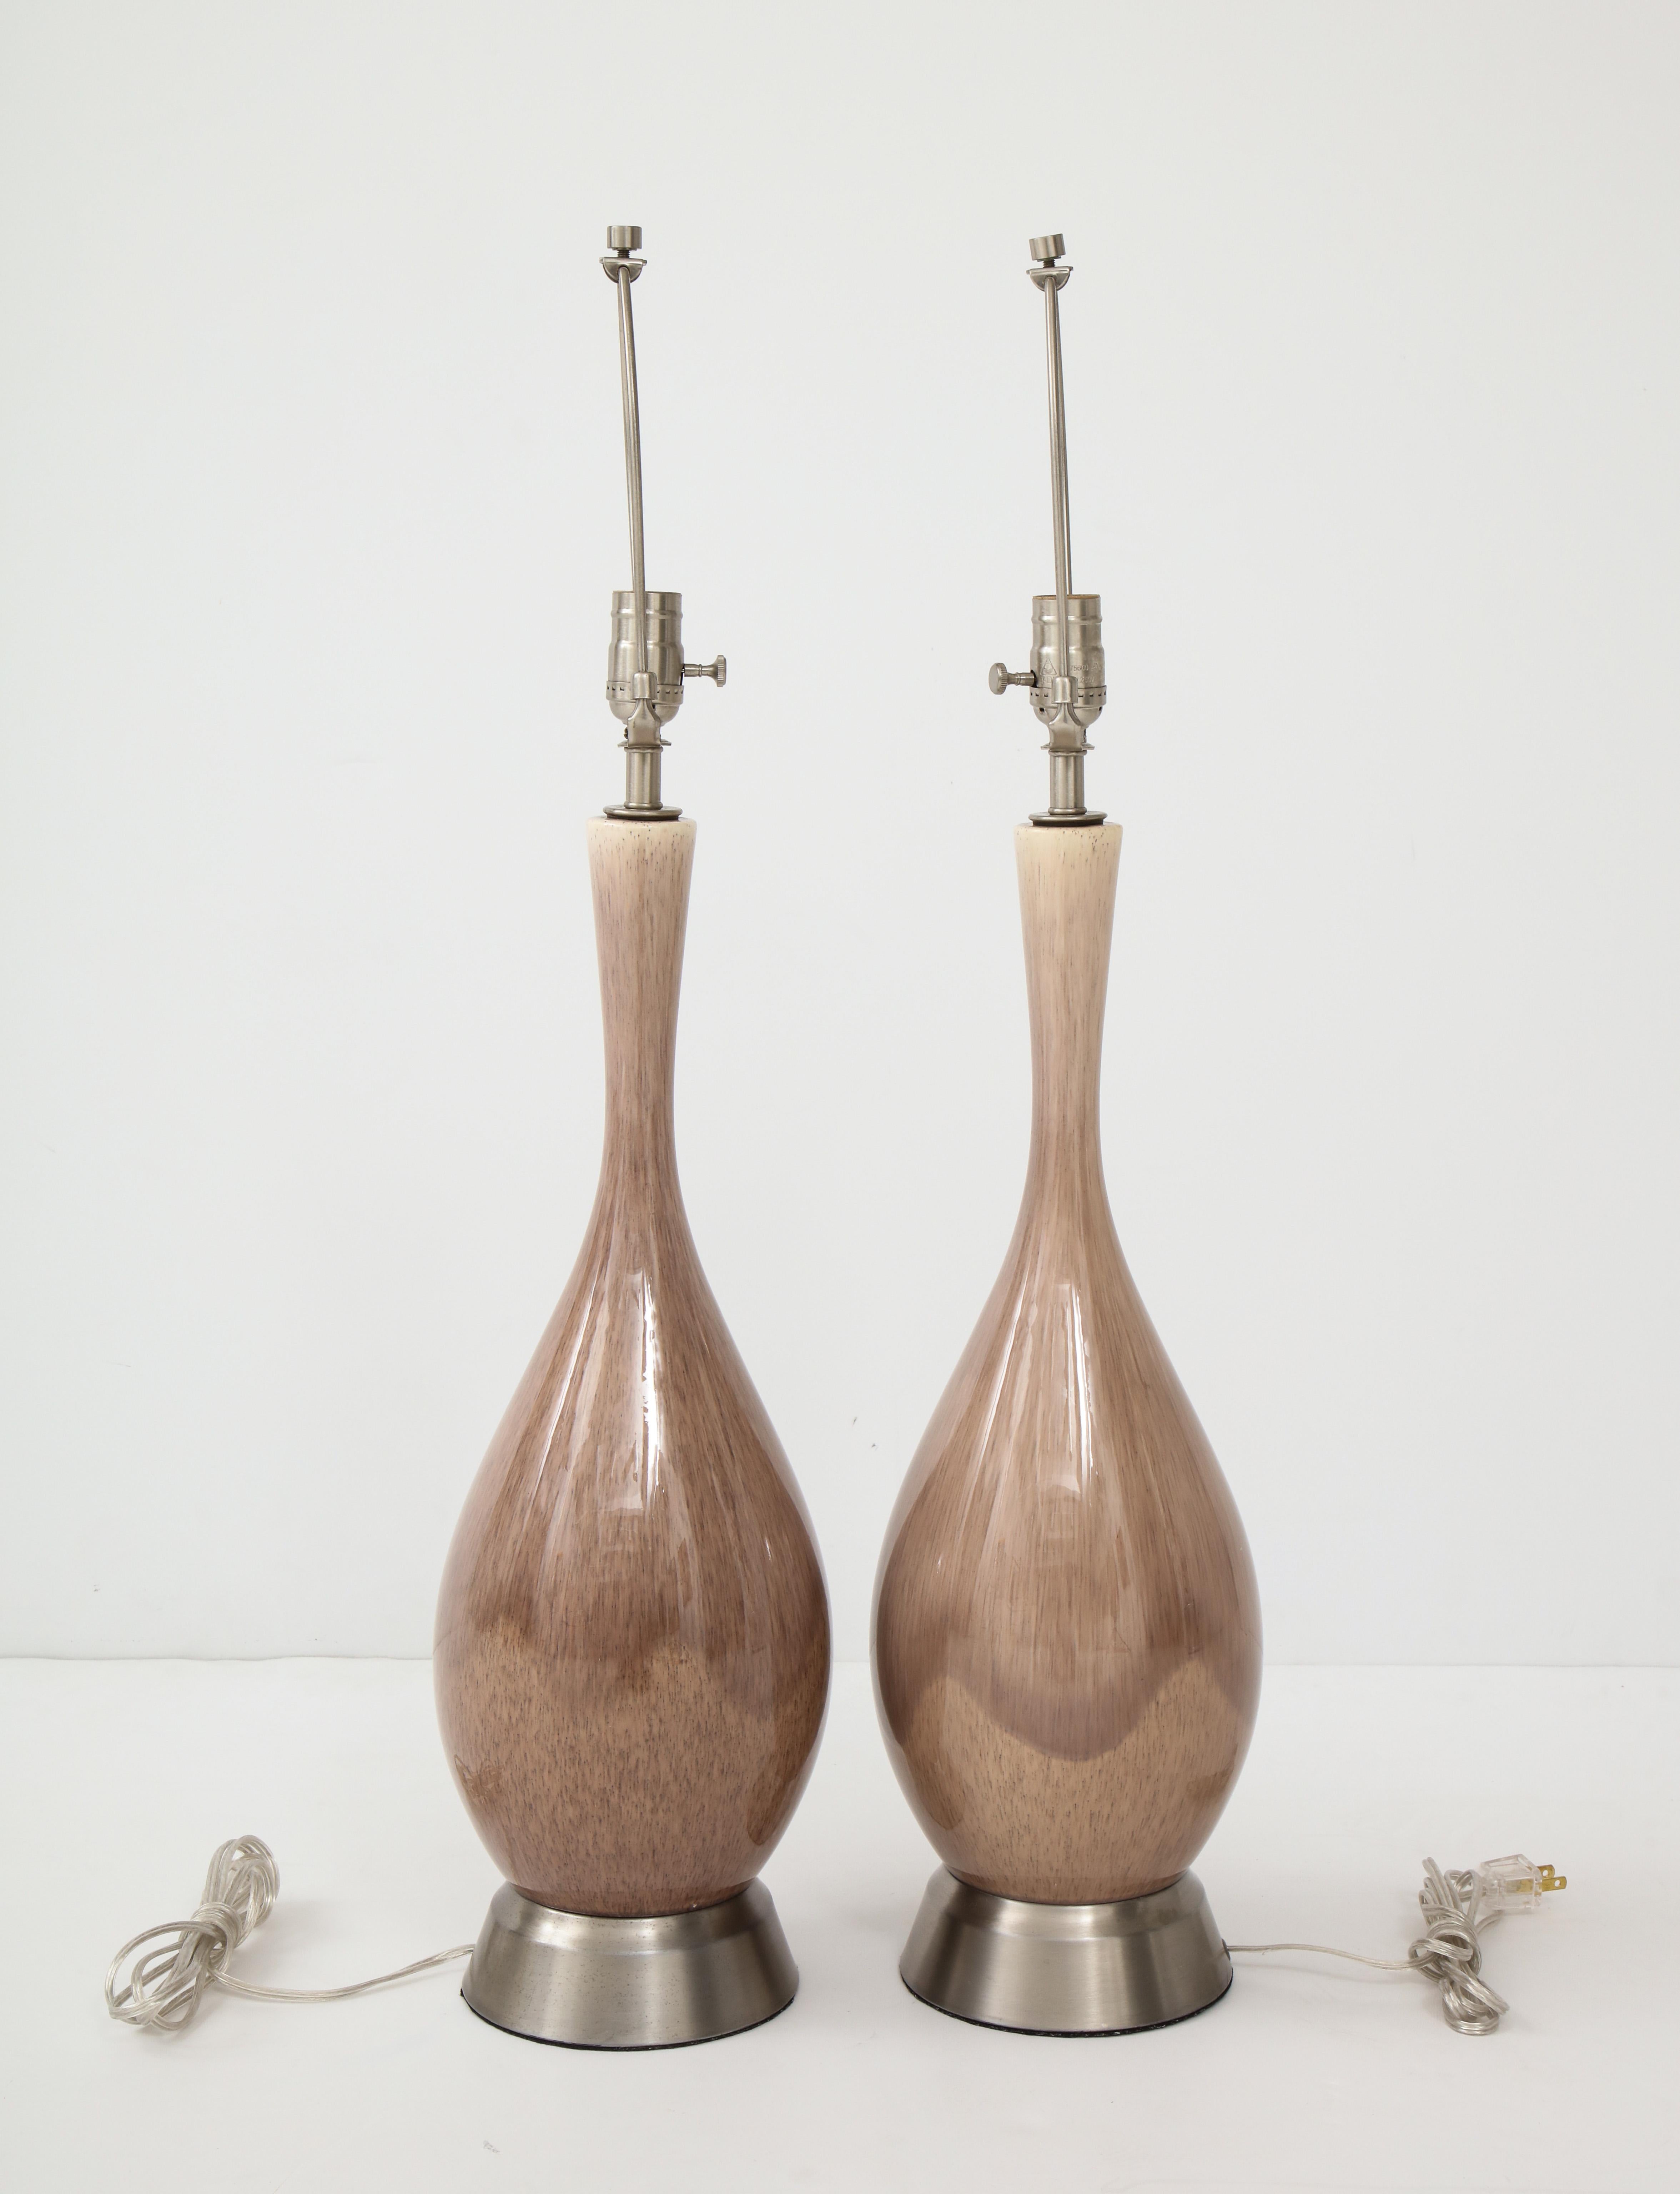 Pair of midcentury bottle form ceramic lamps with a seductive smokey amethyst/grey glaze resting on brushed nickel bases. Rewired for use in the USA.
100W bulb max. On display at 200 Lexington Avenue, 10th floor.